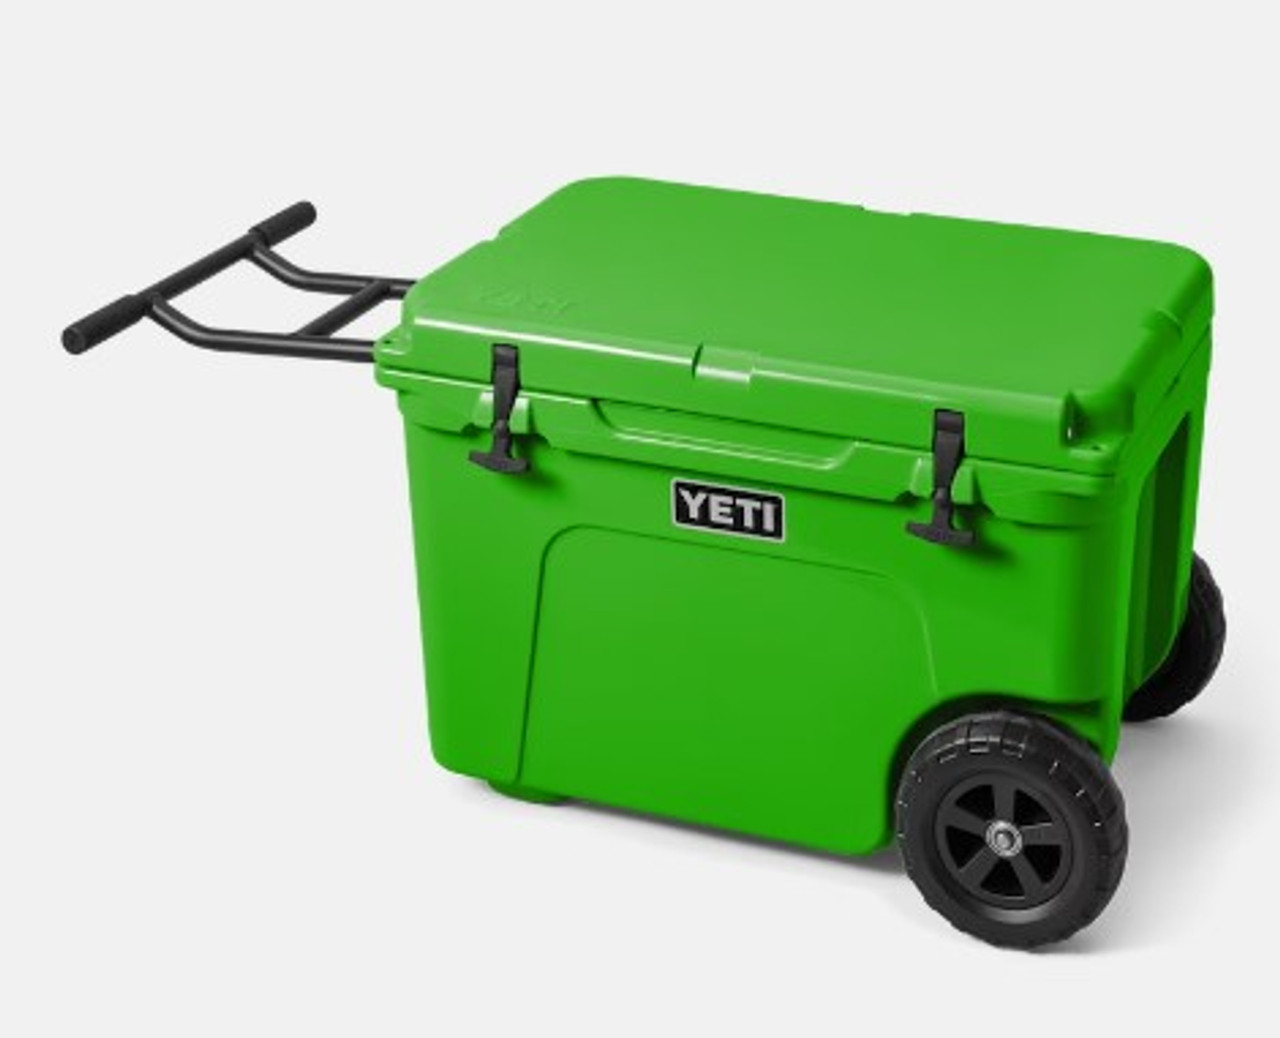 https://cdn11.bigcommerce.com/s-s7ib93jl4n/images/stencil/1280x1280/products/55451/82929/tundra-Haul-Wheeled-Cooler-Canopy-Green-D__73122.1678475919.jpg?c=2?imbypass=on